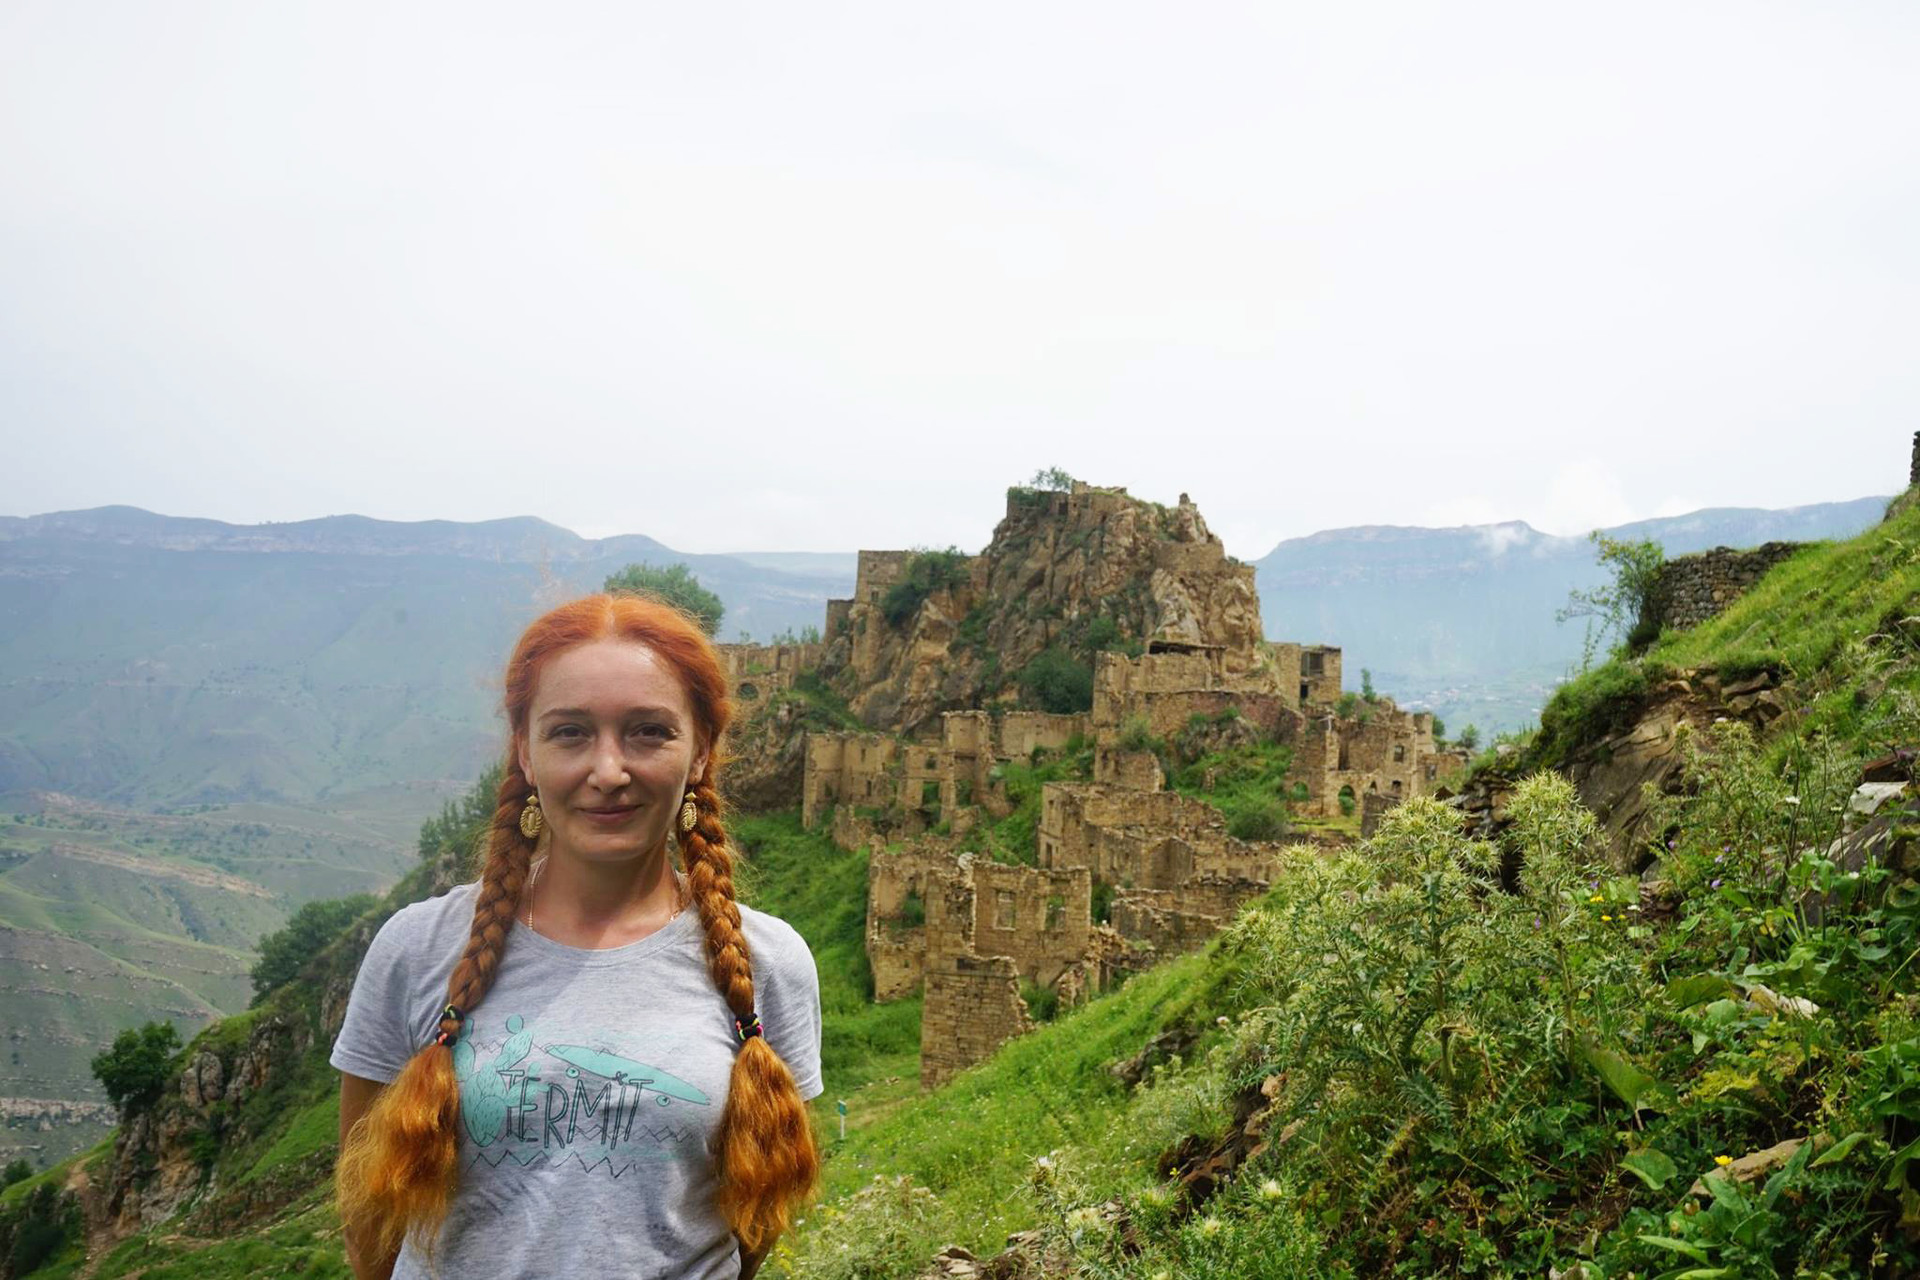 Albina is an artist from Makhachkala. She came alone to visit the abandoned ancient village of Gamsutl. Far up in the mountains of Dagestan, it has been dubbed the Dagestani Machu Picchu. Albina came here to get inspired. Her parents are Avar and Dargin - two of the more than 30 peoples of Dagestan.